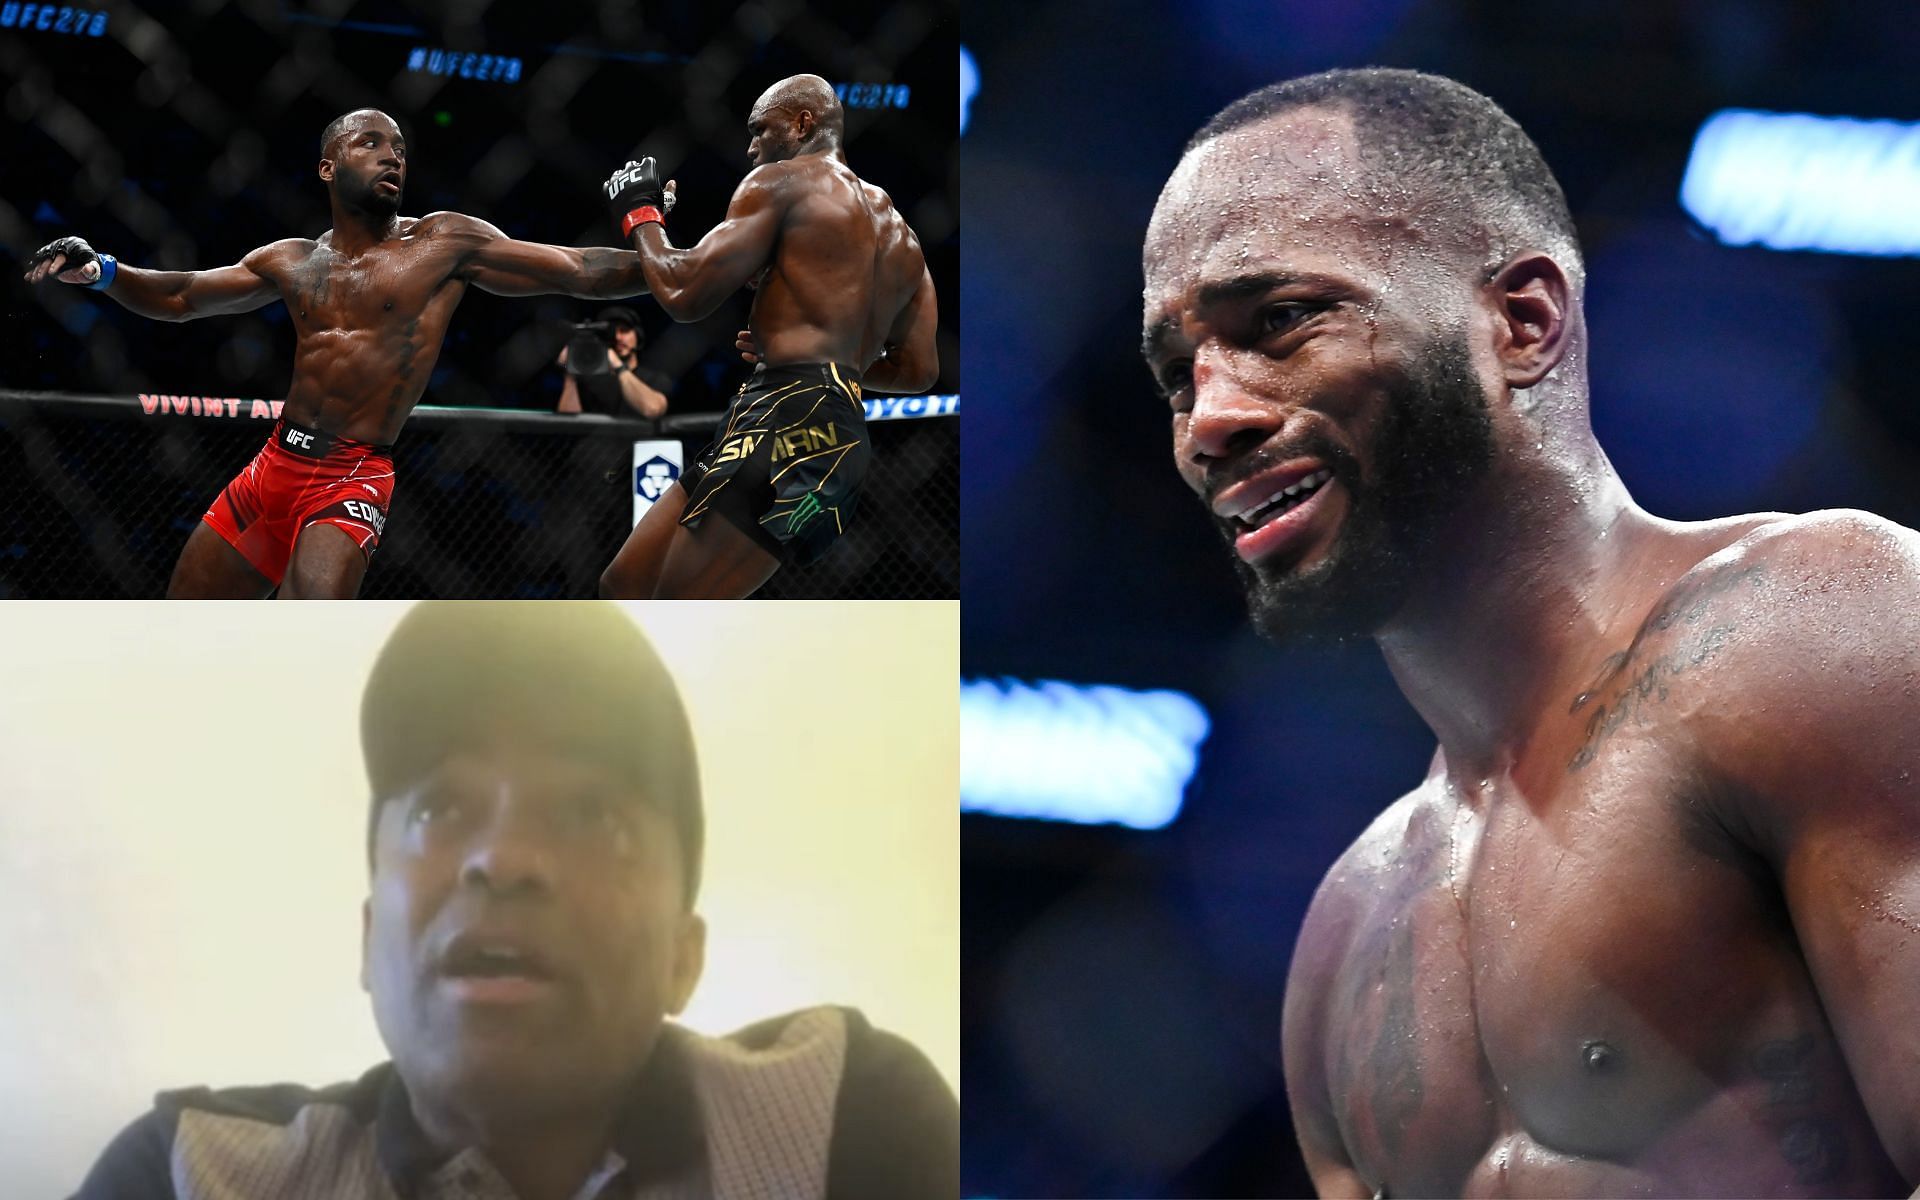 Edwards vs. Usman 2 and Edwards (top left and right, images courtesy of Getty); Lovell (bottom left, image courtesy of MMAFightingonSBN YouTube channel)